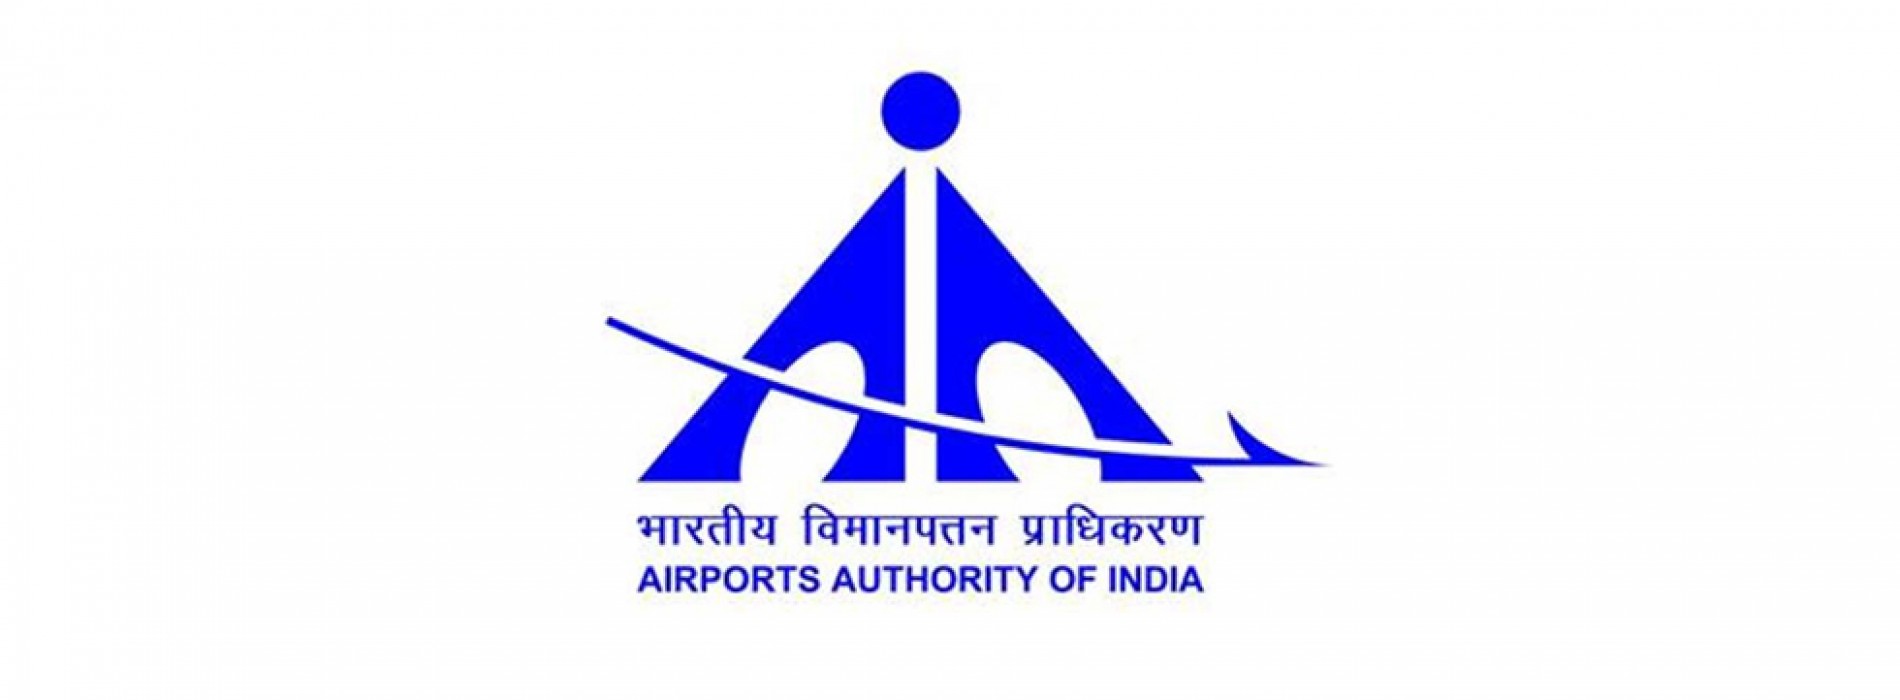 Airports Authority of India to raise funds to meet capital expenditure requirements